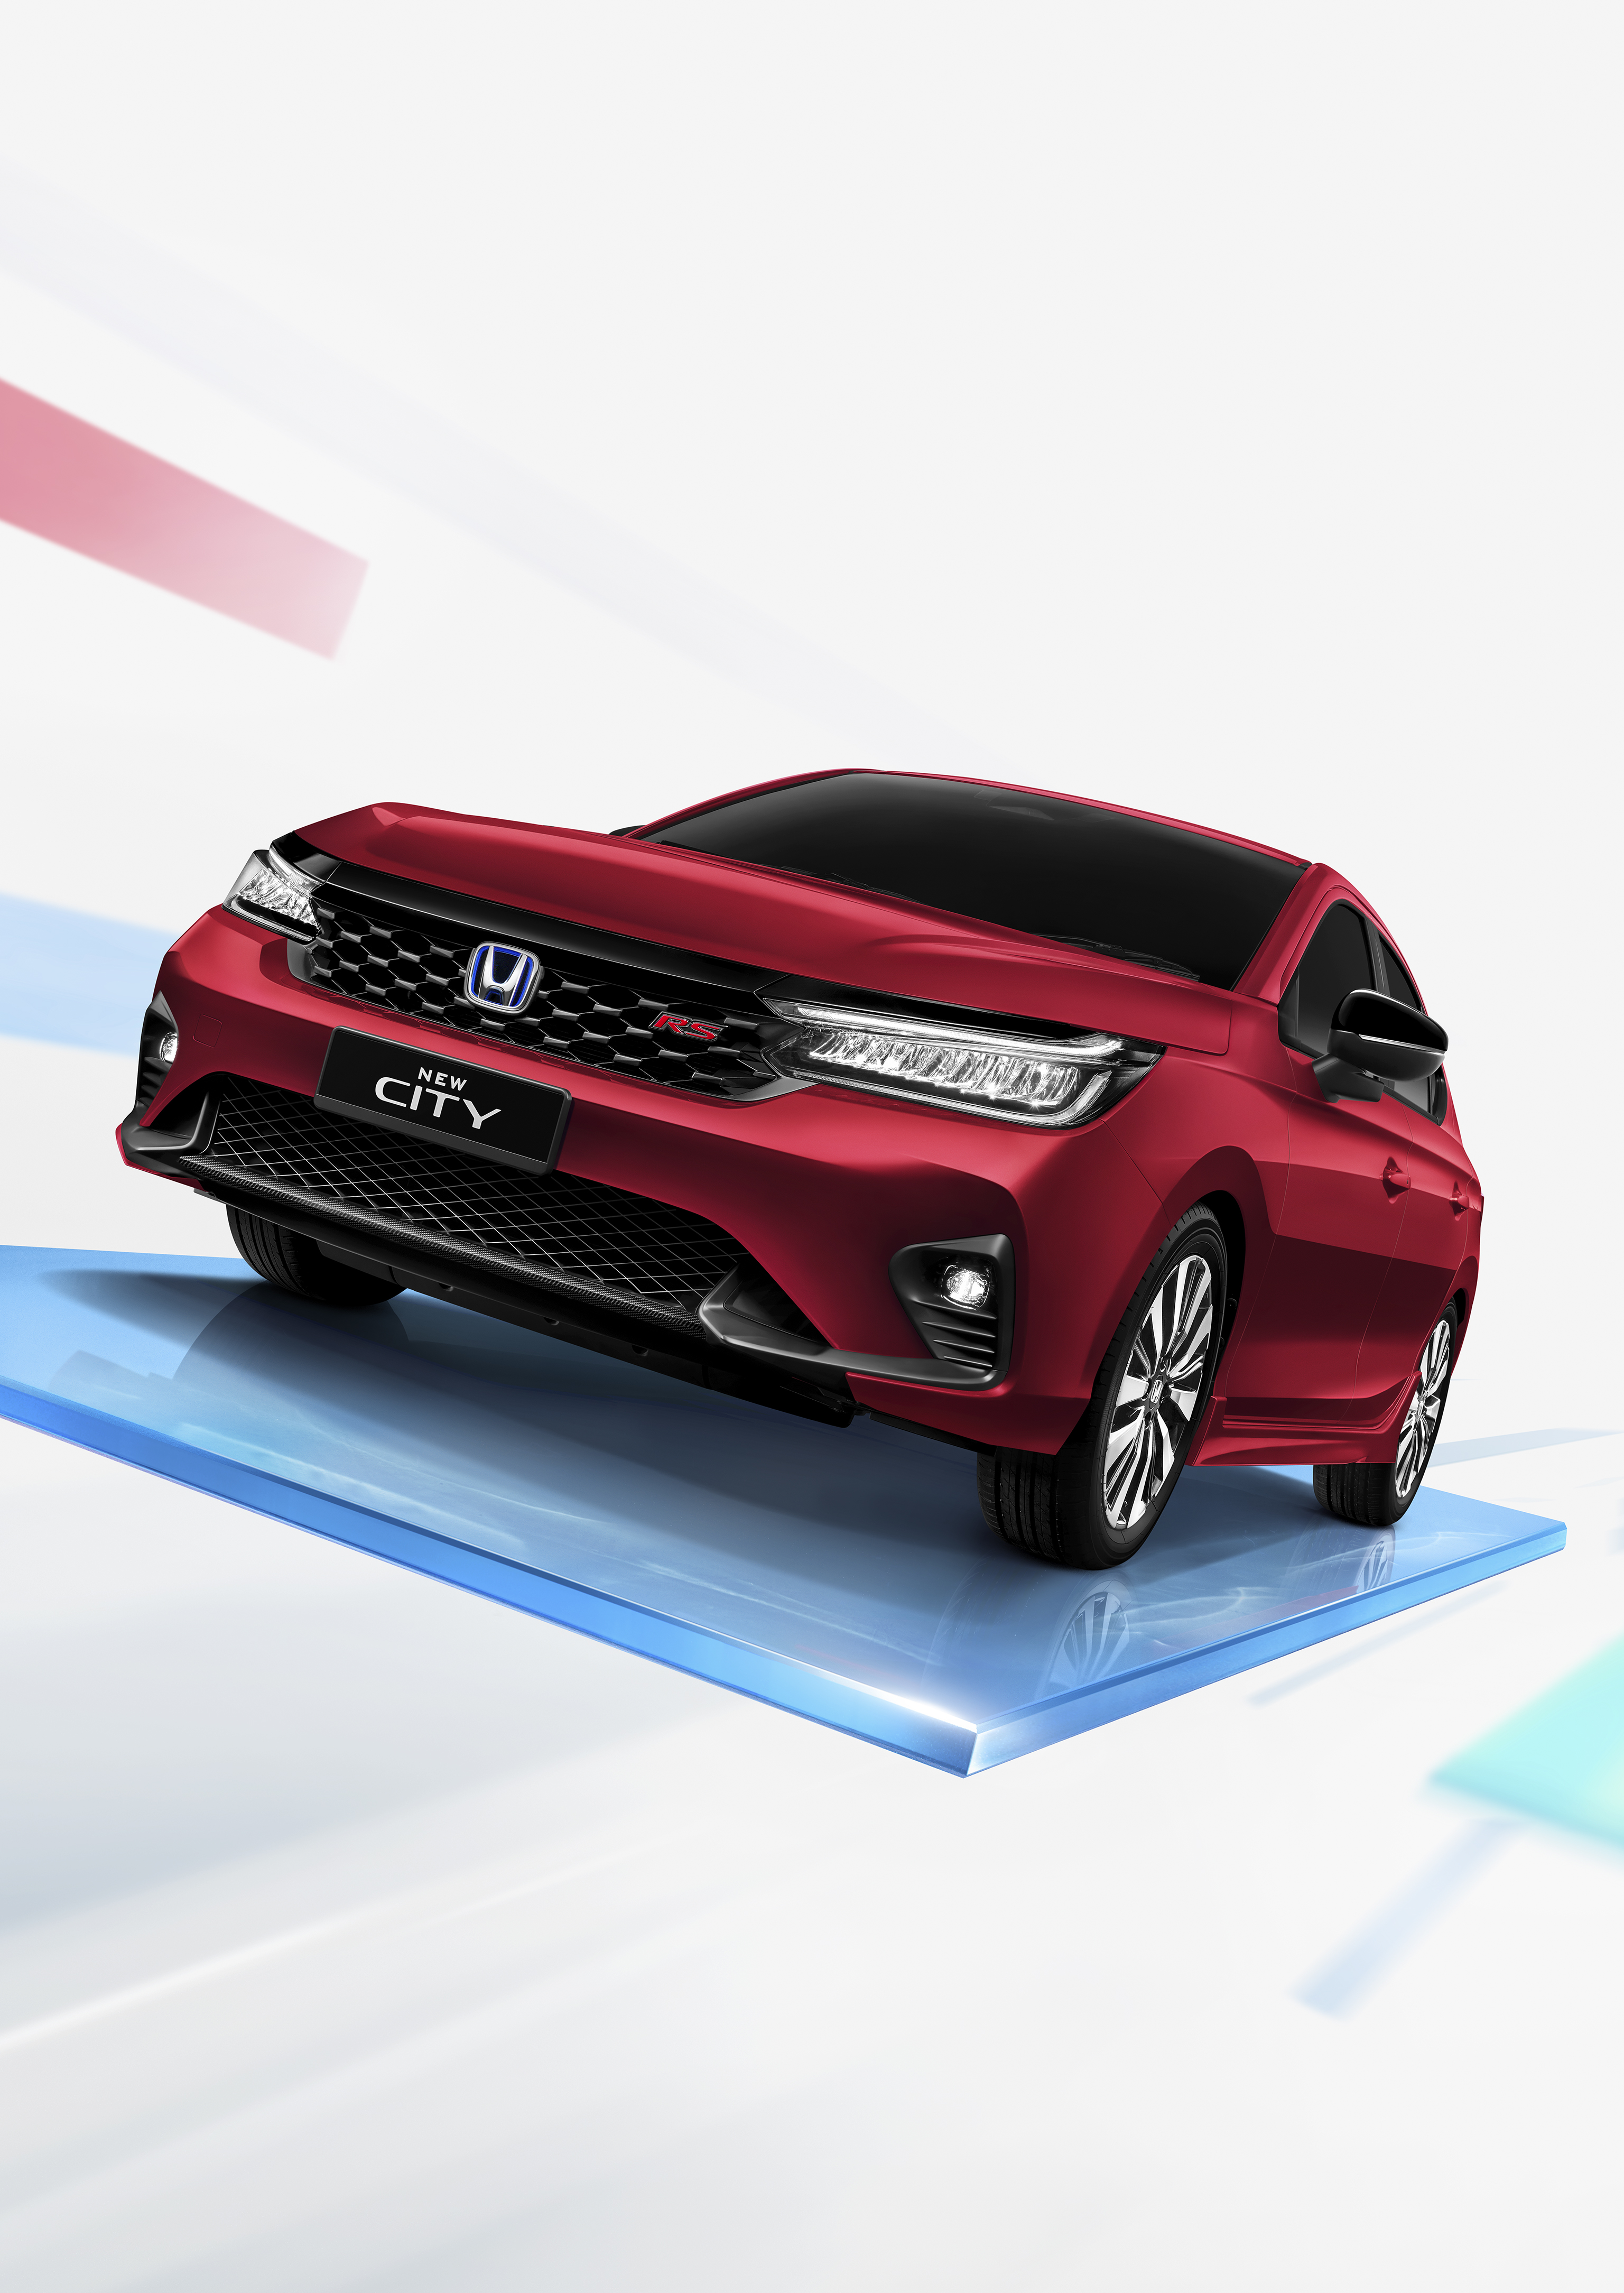 The New City is now open for bookings beginning 18<sup>th</sup>  July 2023 at all Honda dealerships in Malaysia.